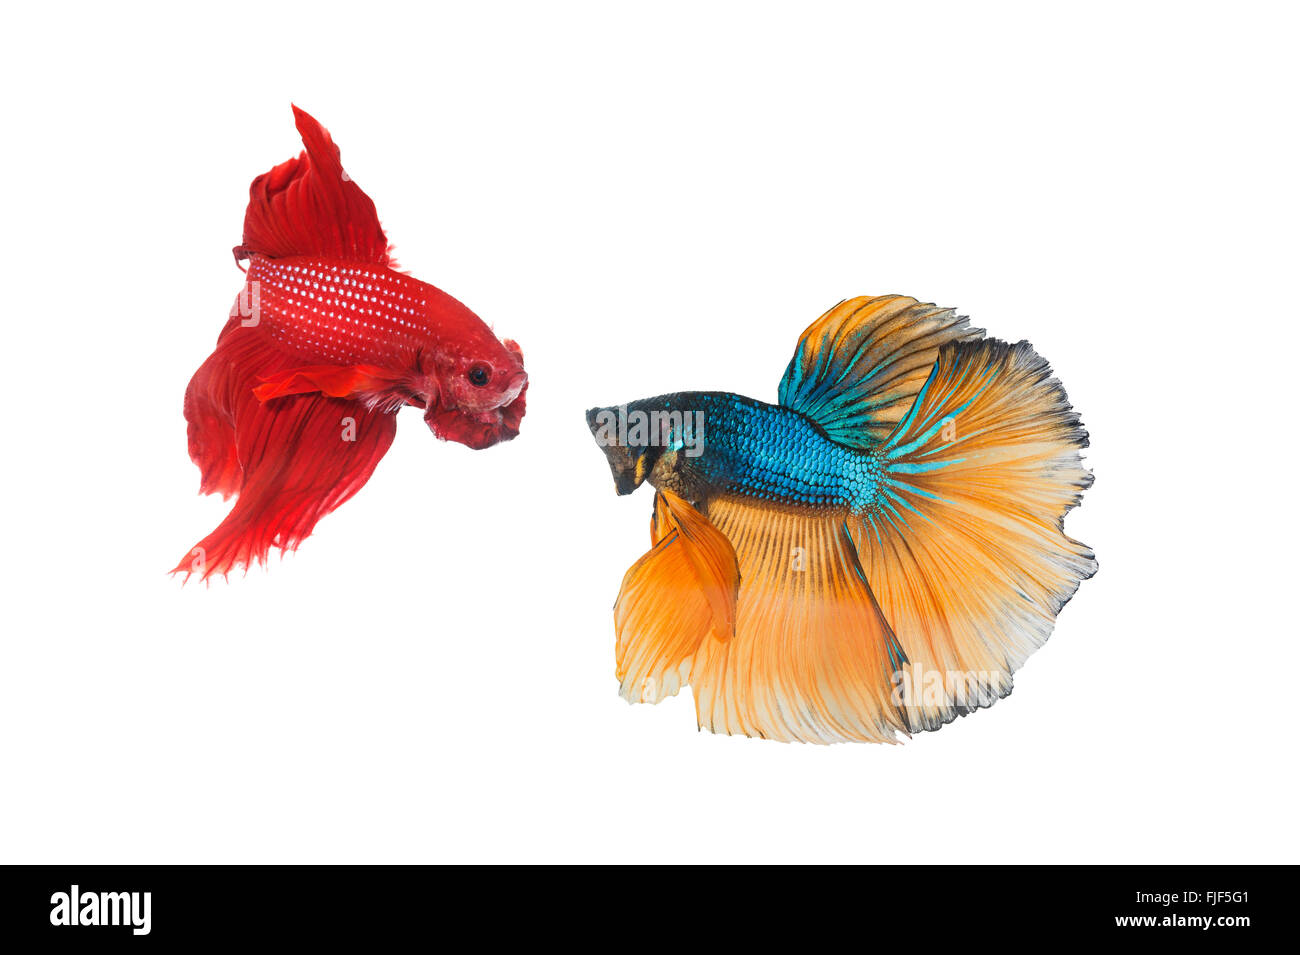 Couple betta fighting fish top form preparing to fight isolated a on white Stock Photo